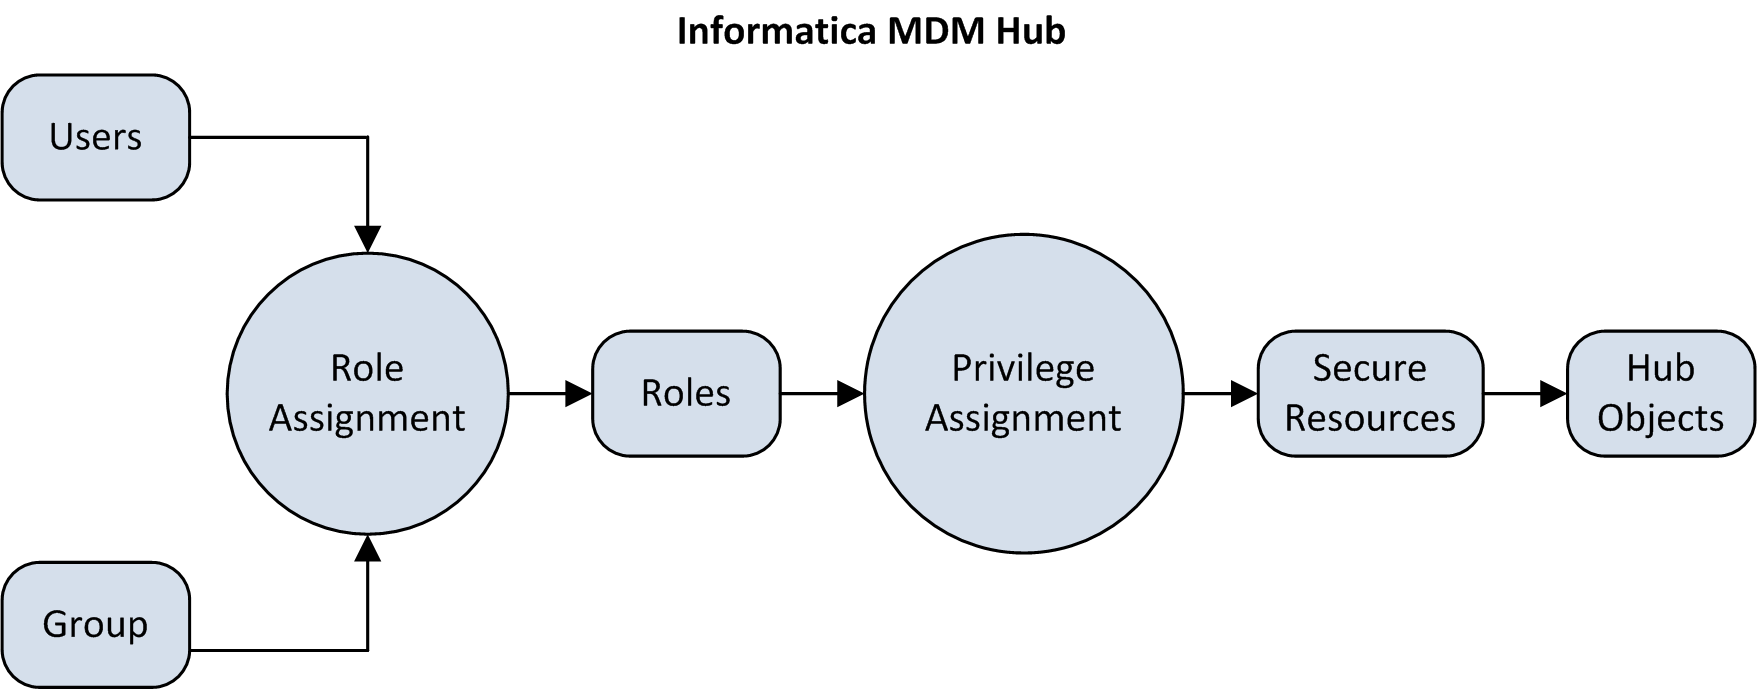 The MDM Hub handles all of the following: users and groups can both perform role assignment. Role assignment leads to roles. Roles leads to privilege assignment. Privilege assignment leads to secure resources. Secure resources leads to Hub objects.MDM Hub
			 